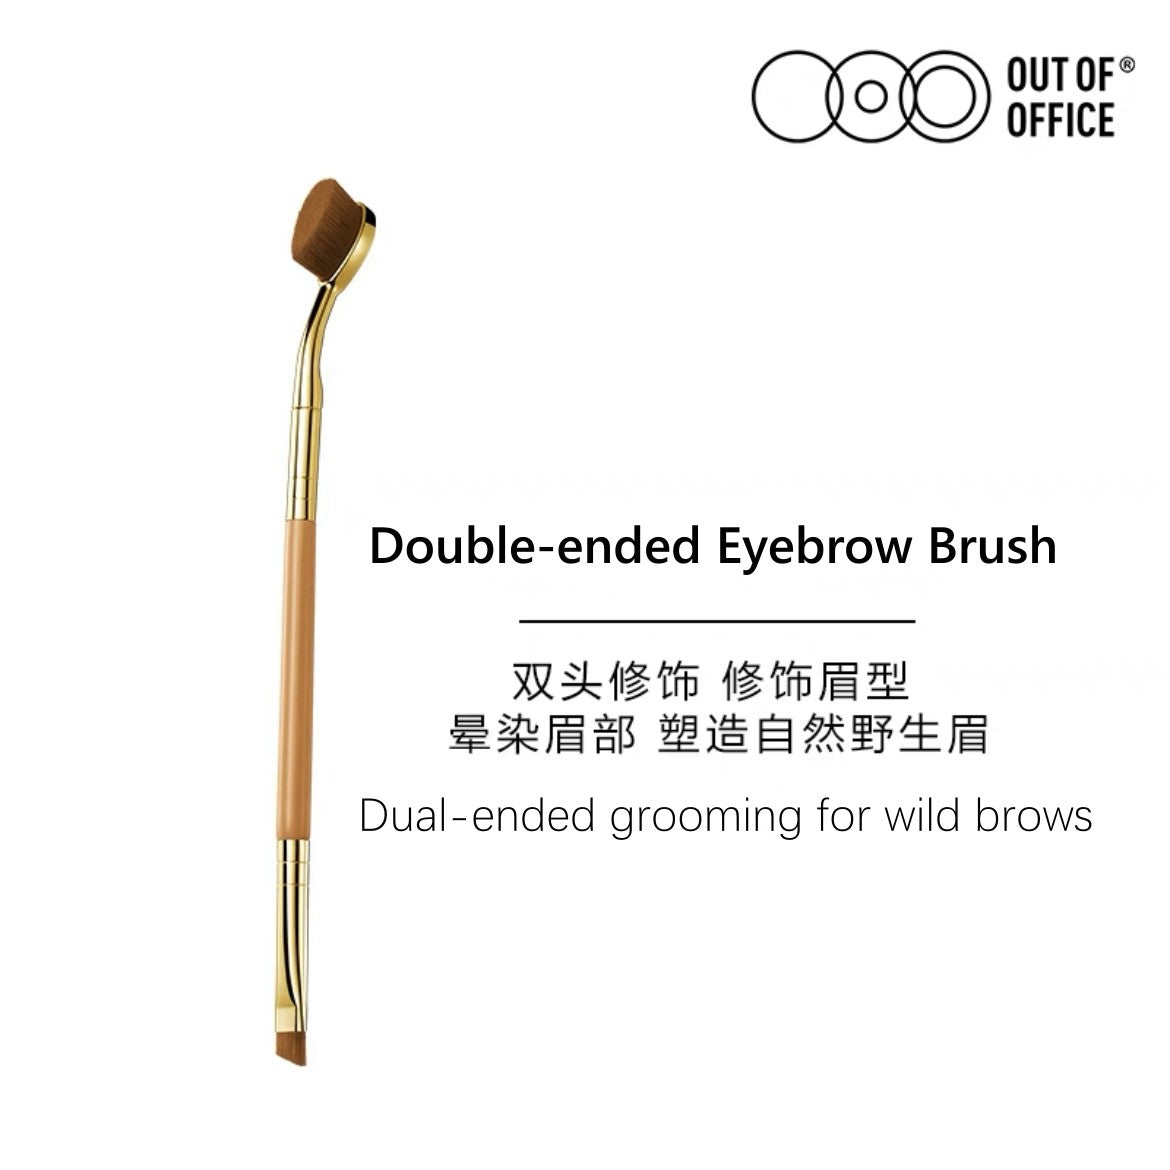 OutofOffice Professional Cosmetic Brushes OOO专业化妆刷